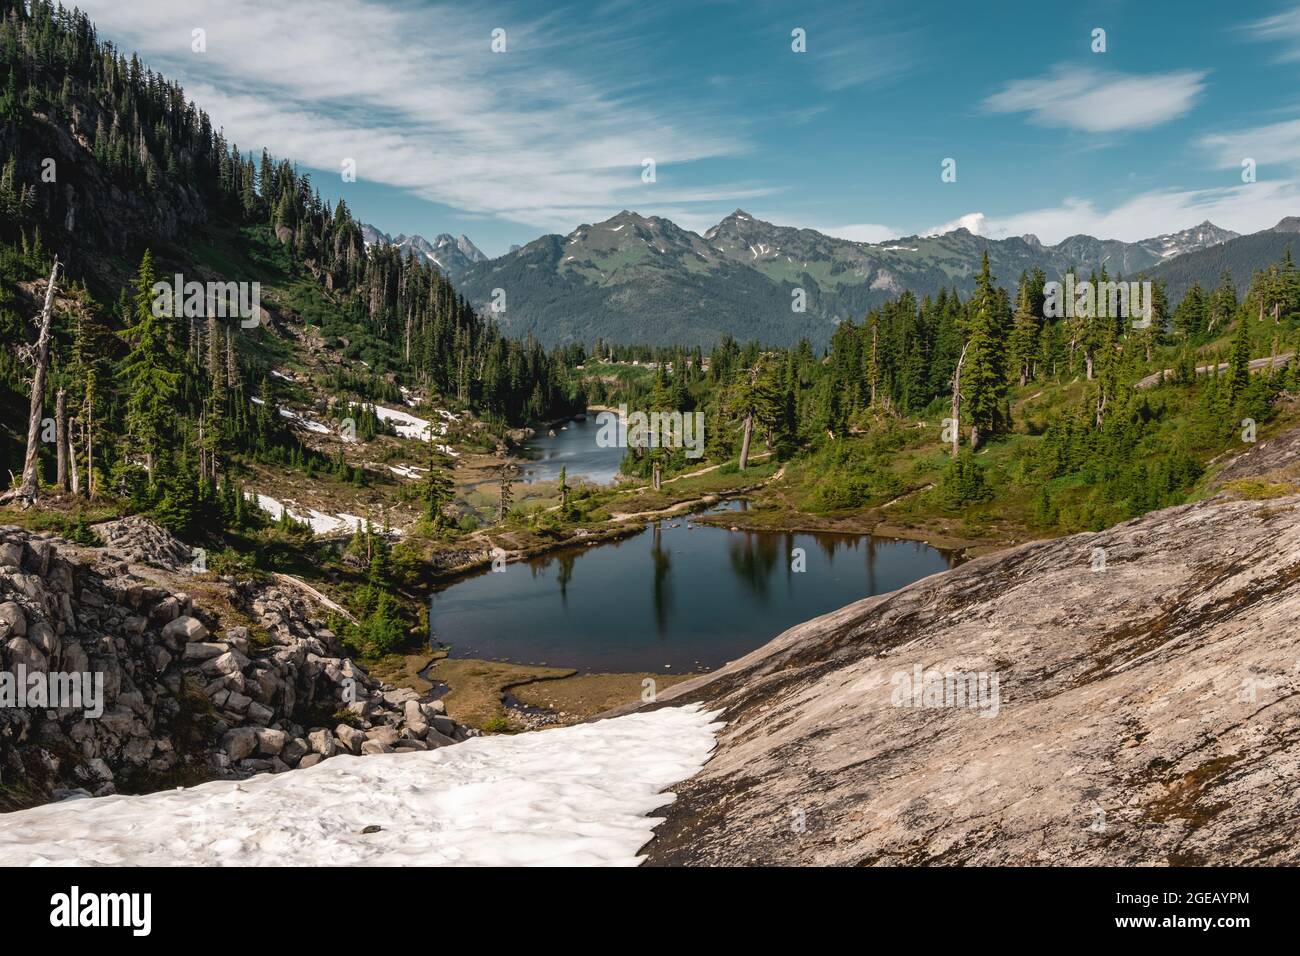 Reflections on Bagley lakes at Heather Meadows in the Mt. Baker-Snoqualmie National Forest. Stock Photo